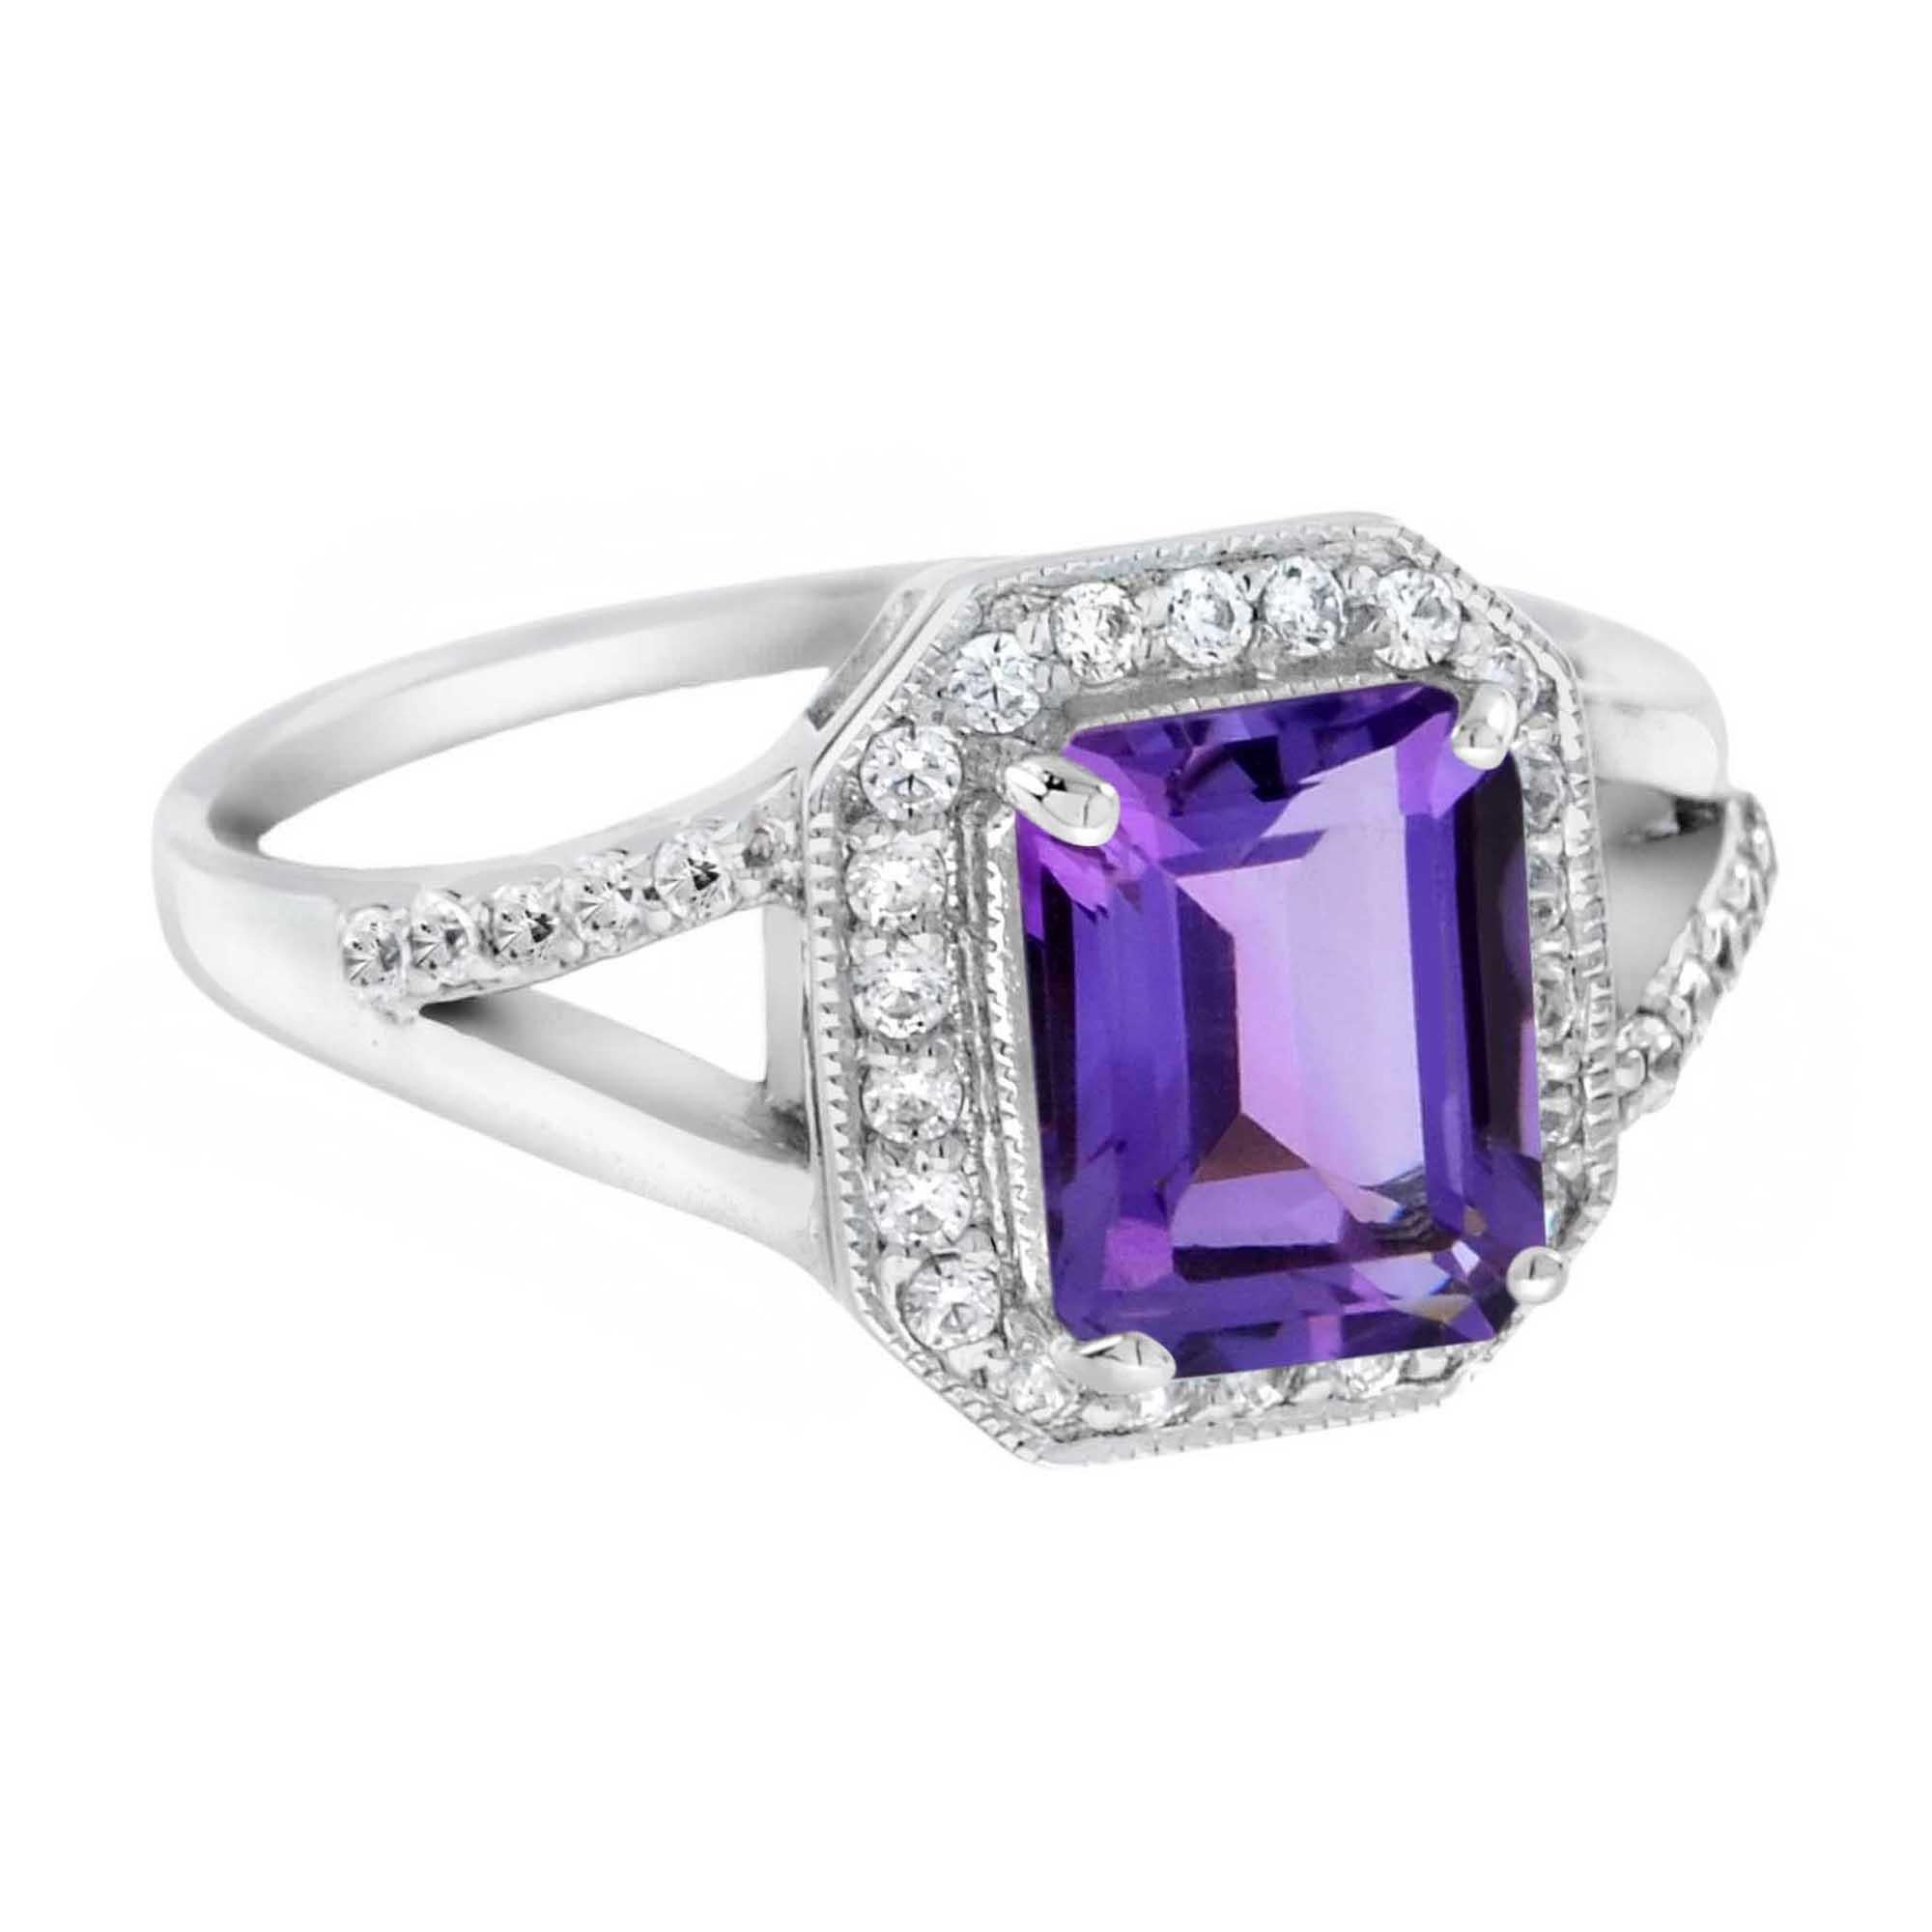 For Sale:  Emerald Cut Amethyst and Diamond Split Shank Engagement Ring in 18K White Gold 2